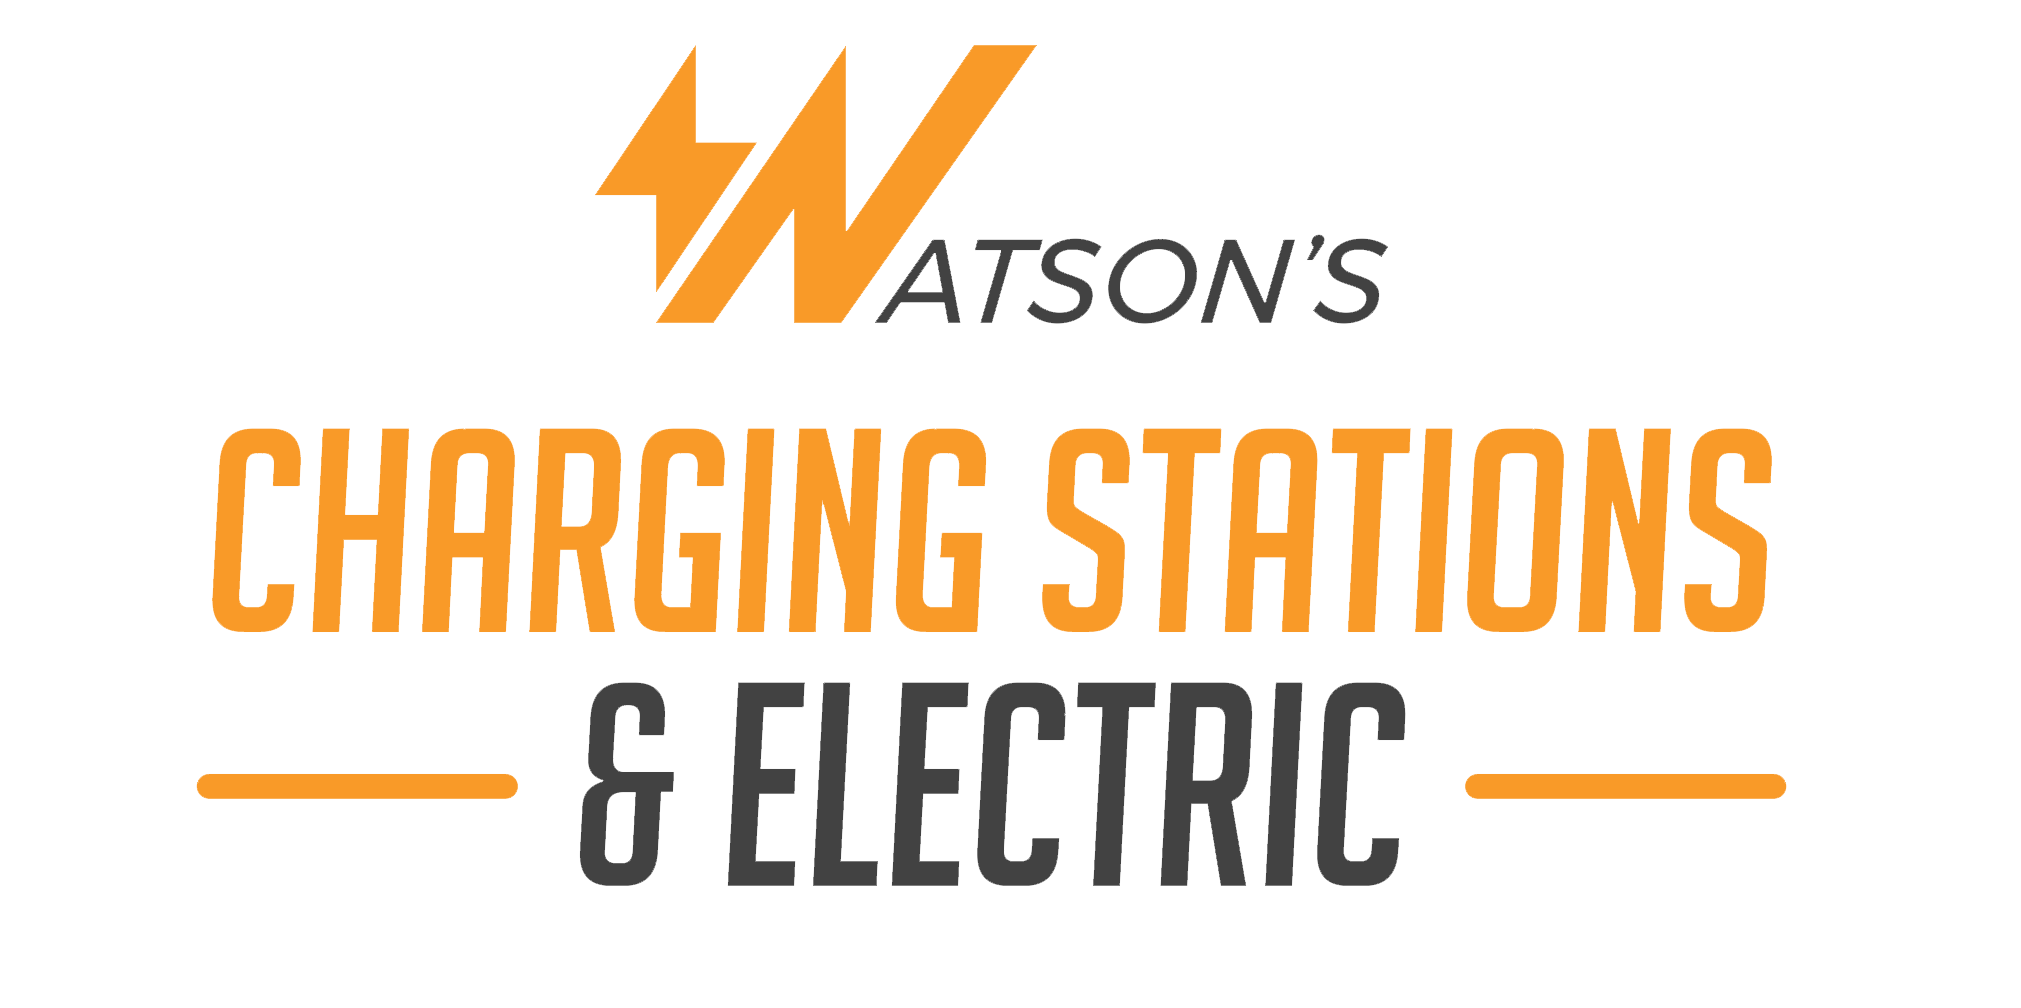 Watson's Charging Stations & Electric